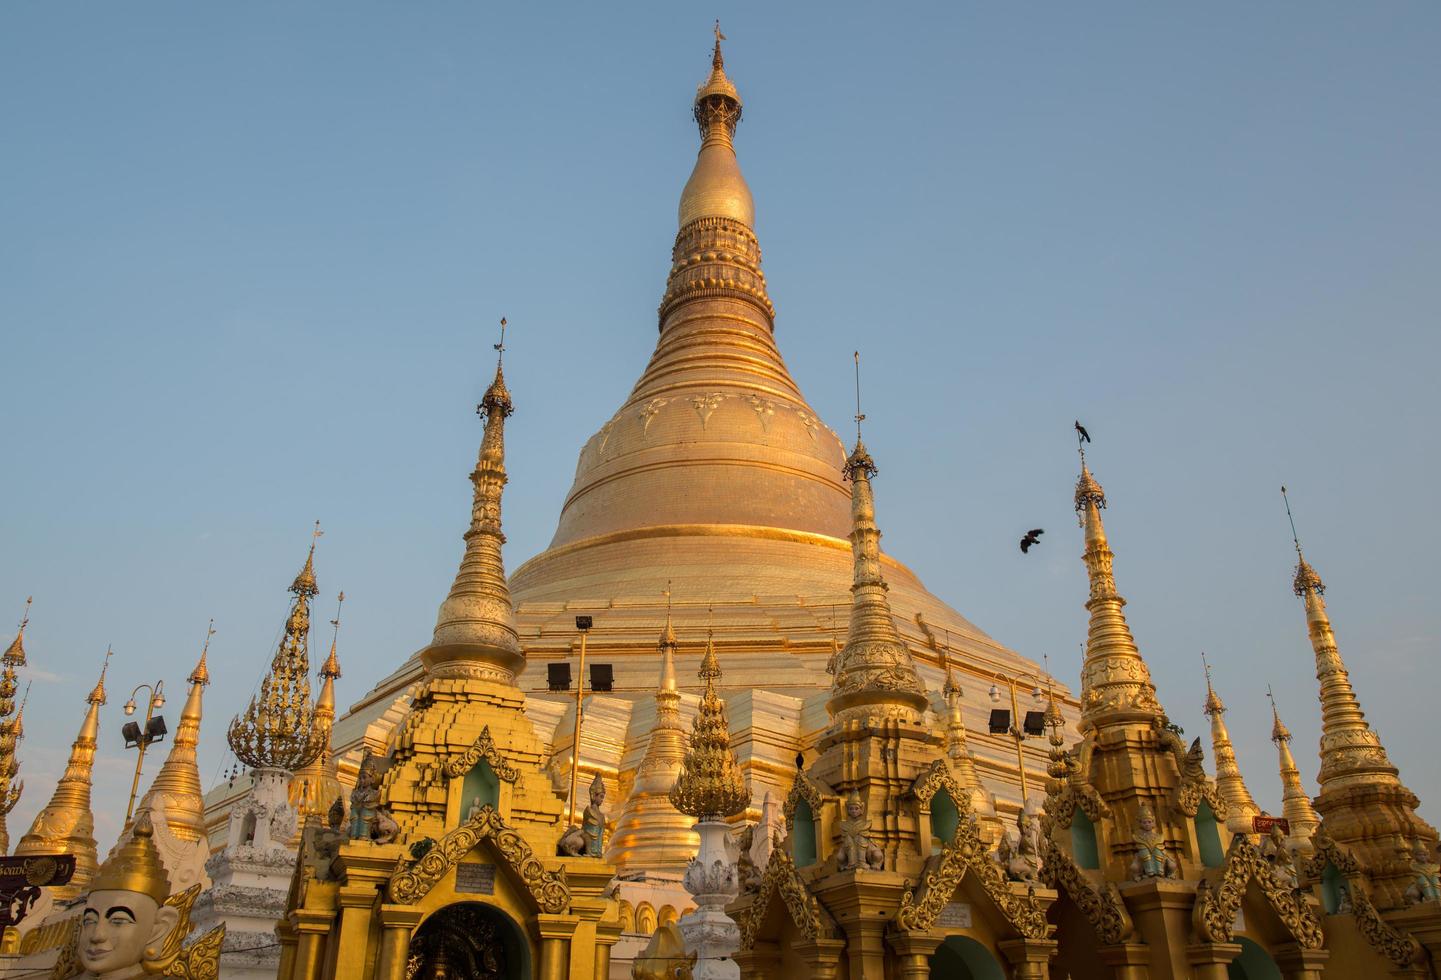 Shwedagon pagoda the most tourist attraction place in Yangon township of Myanmar during the sunset. photo